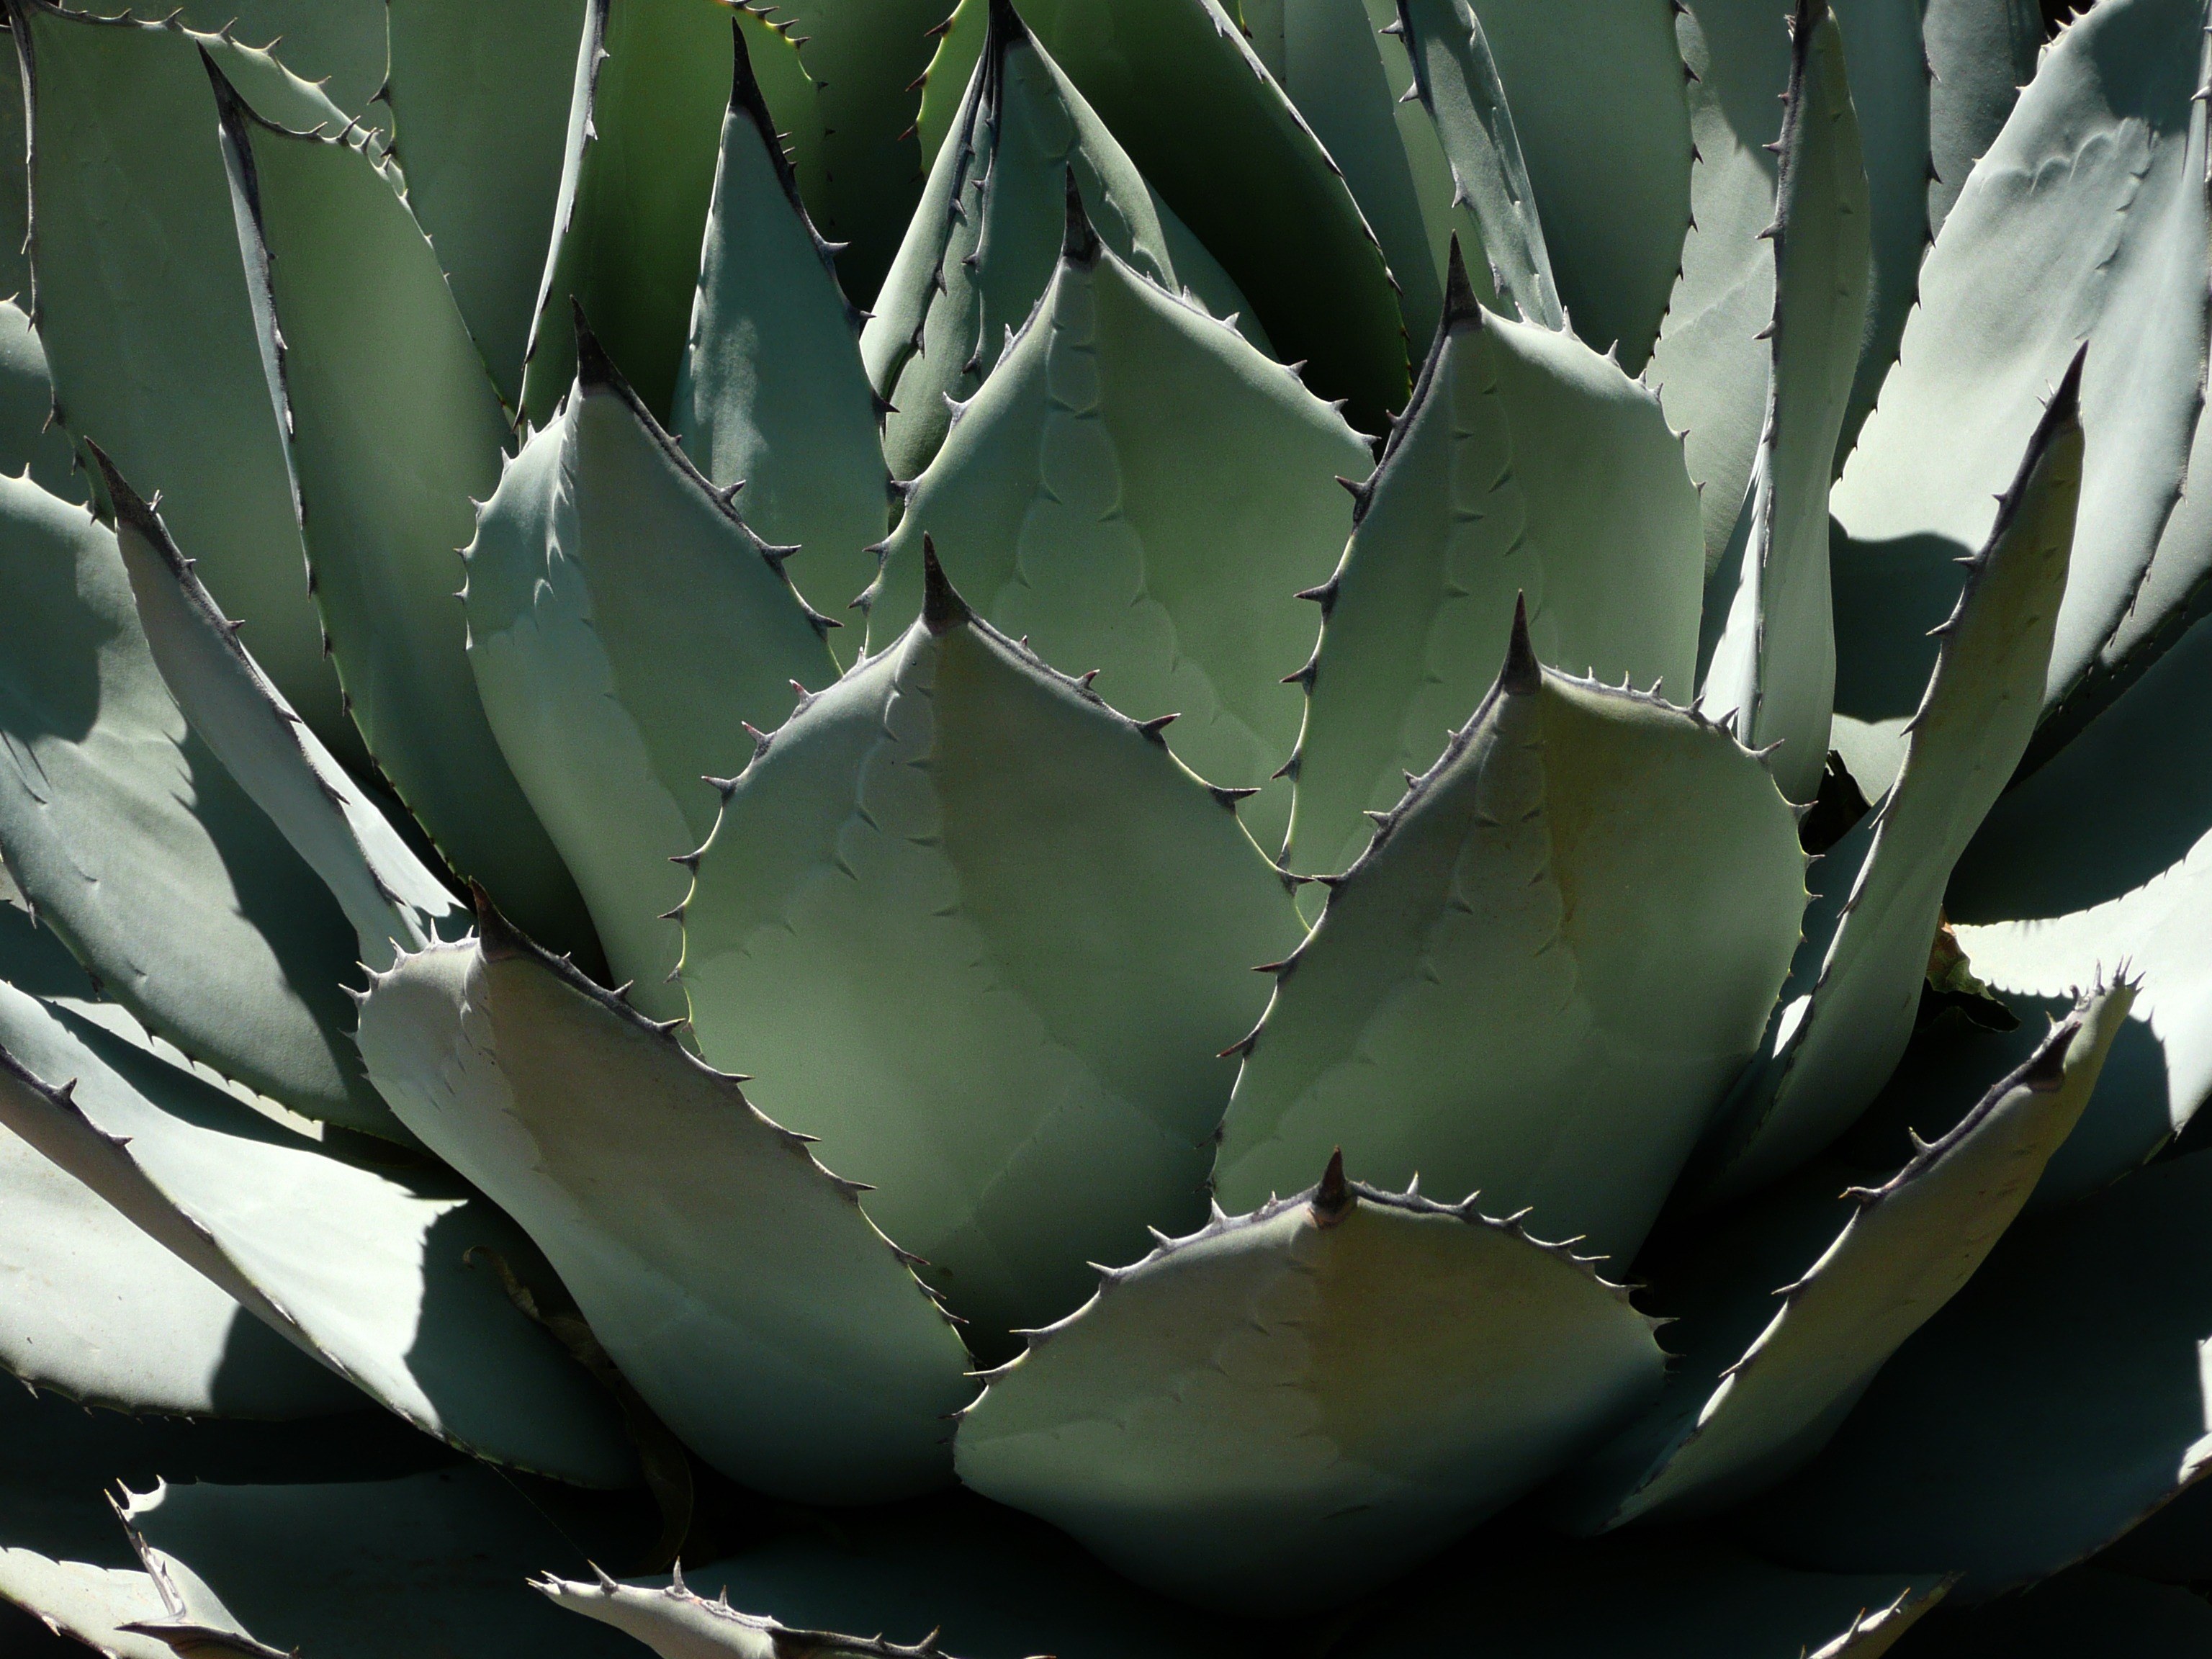 #3072x2304 #pita #century Plant #agave #cactus #plant - Agave Plant With Thorns , HD Wallpaper & Backgrounds